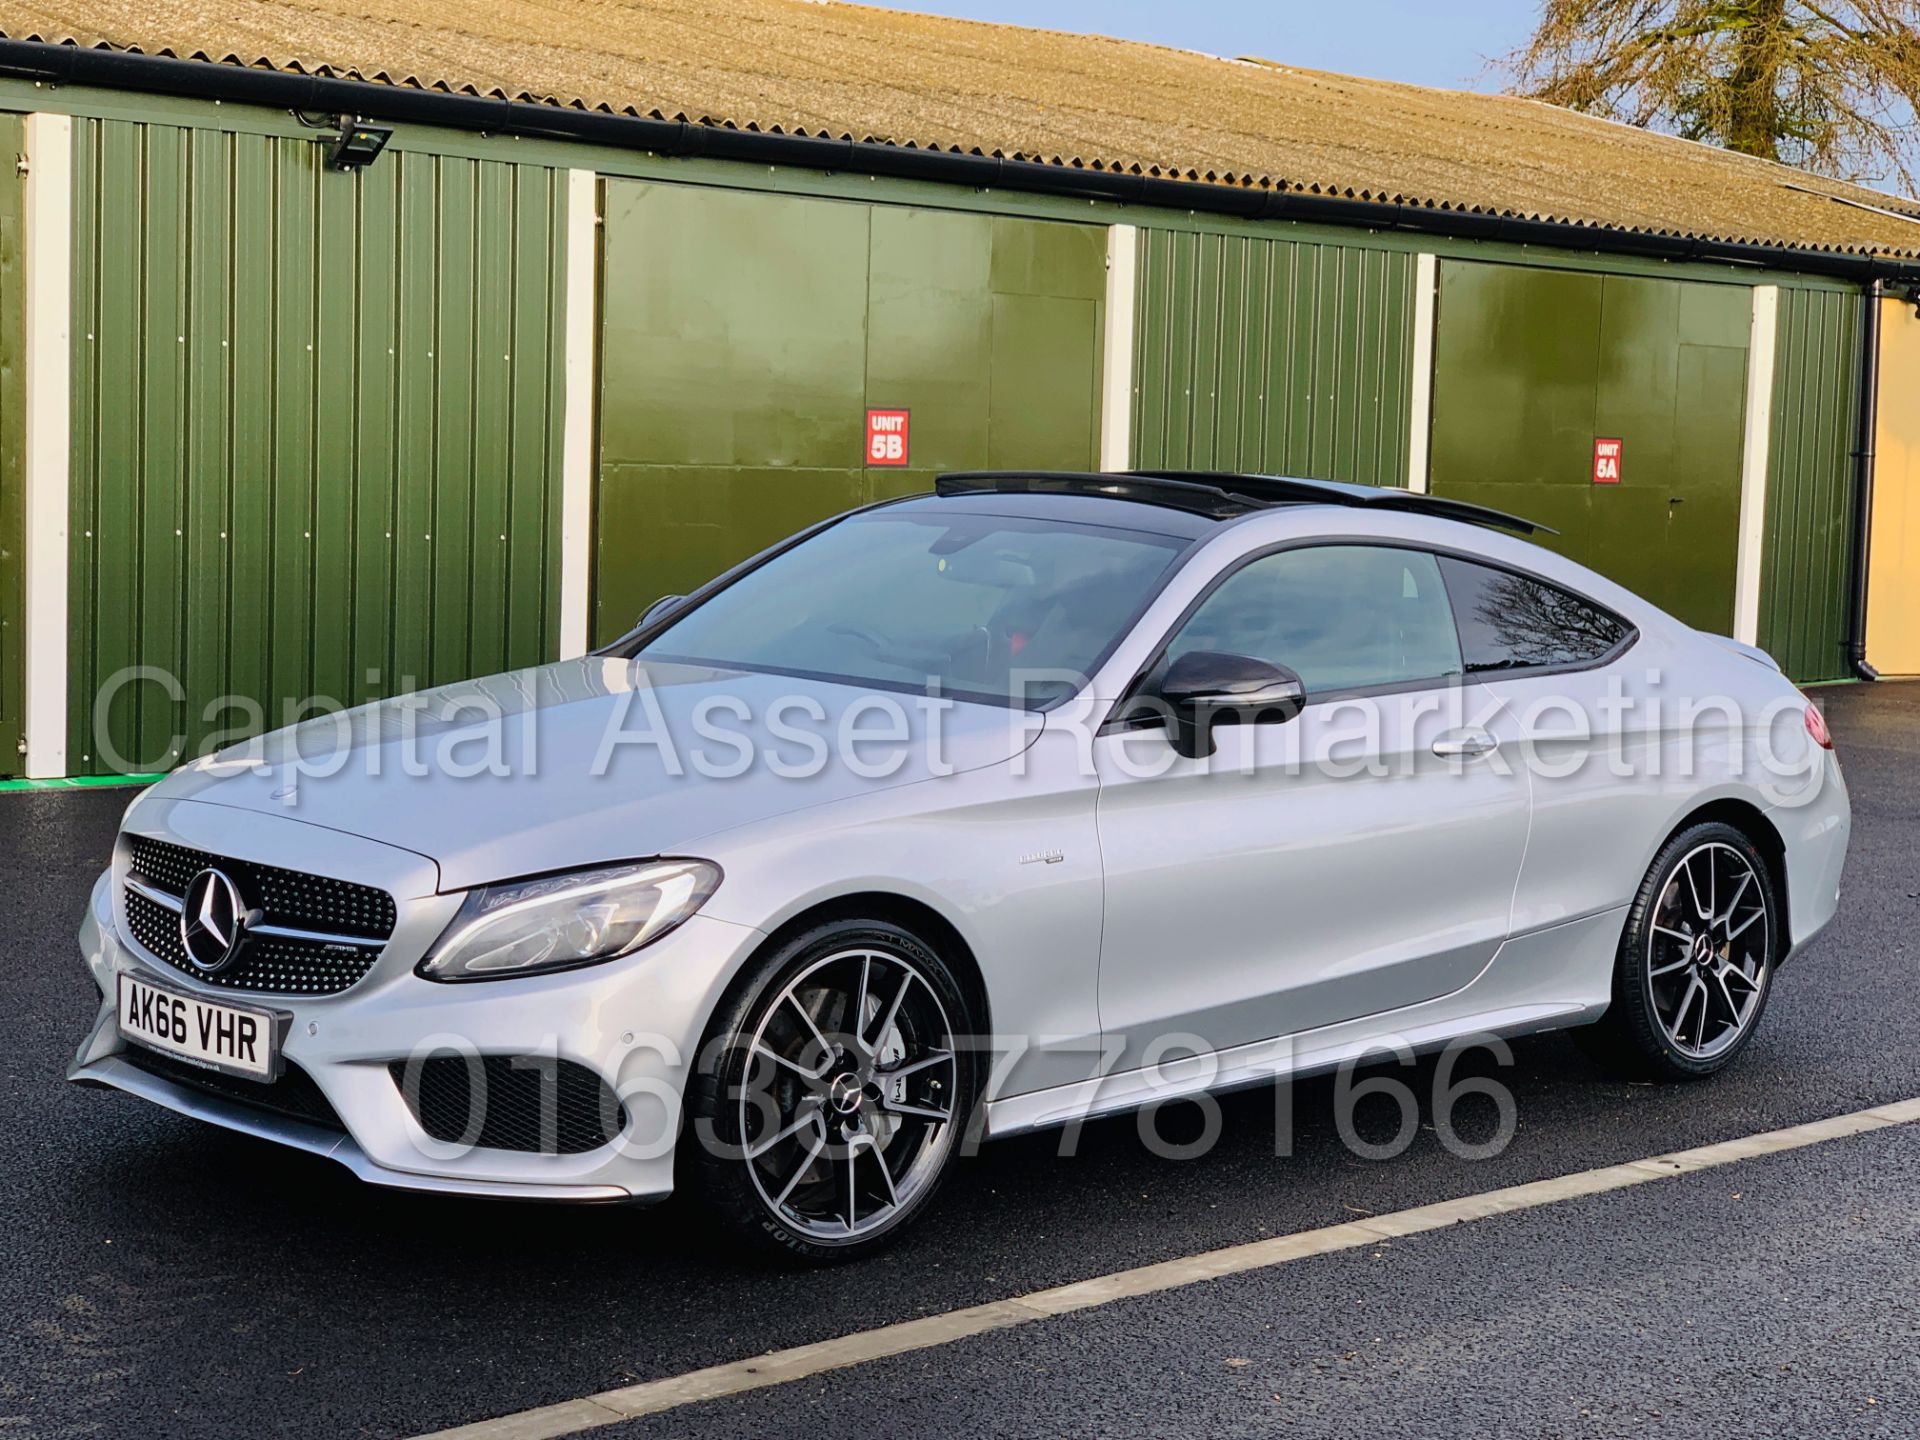 MERCEDES-BENZ C43 AMG *PREMIUM 4 MATIC* COUPE (2017) '9-G AUTO - LEATHER - SAT NAV' **FULLY LOADED** - Image 7 of 67